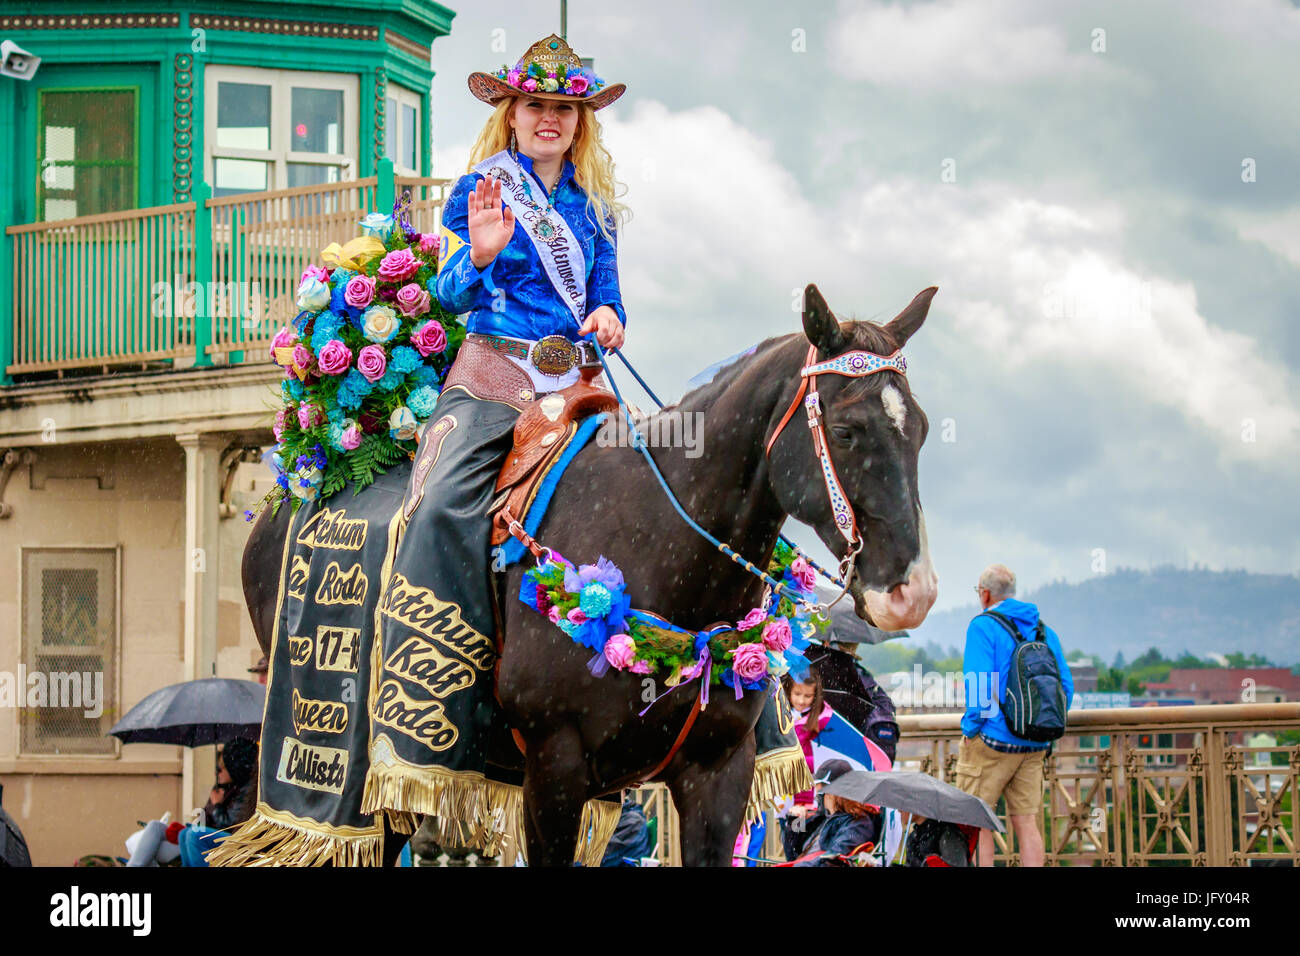 Portland, Oregon, USA - June 10, 2017: Glenwood Ketchum Kalf Rodeo Queen, Callista Howell, in the Grand Floral Parade, as it stretched through the rai Stock Photo